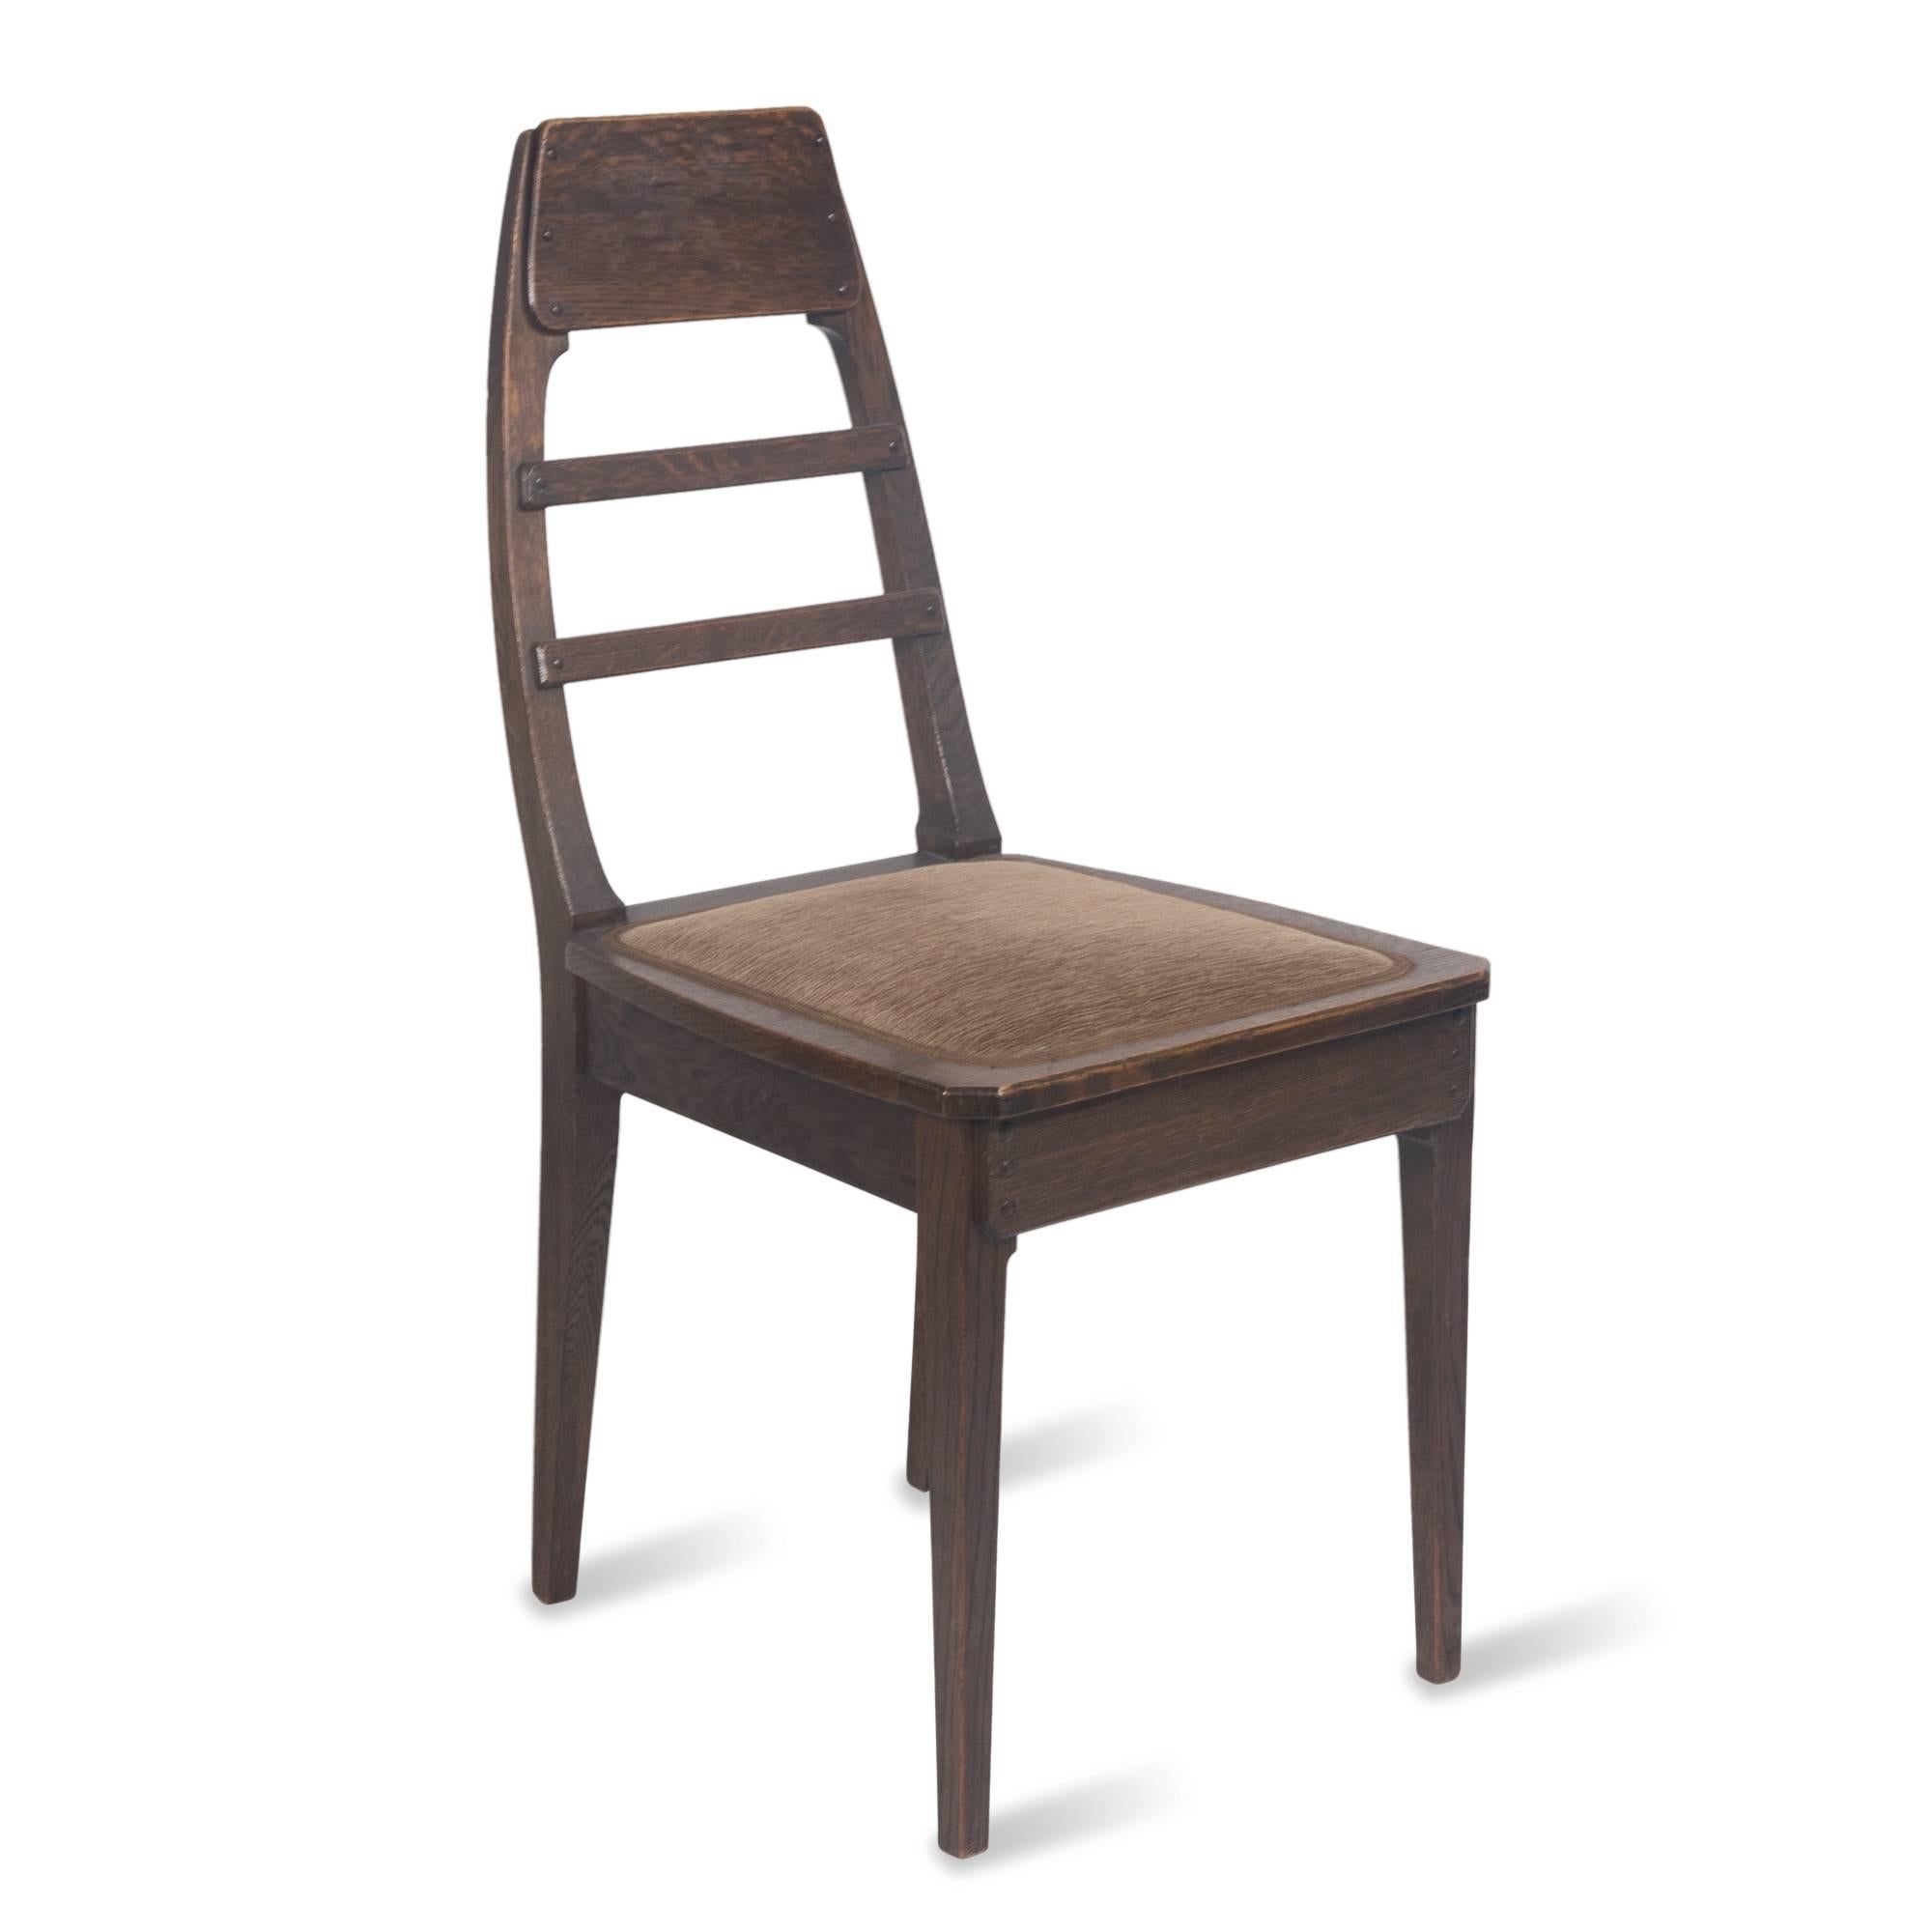 Wood side chair, square seat and double slat back, gently rounded top, with wooden peg joinery, hand-stitched seat cushion, by Richard Riemerschmid, Germany, circa 1900. Measures: Back height 36 in, seat height 18 in, width 17 in, depth 23 in.